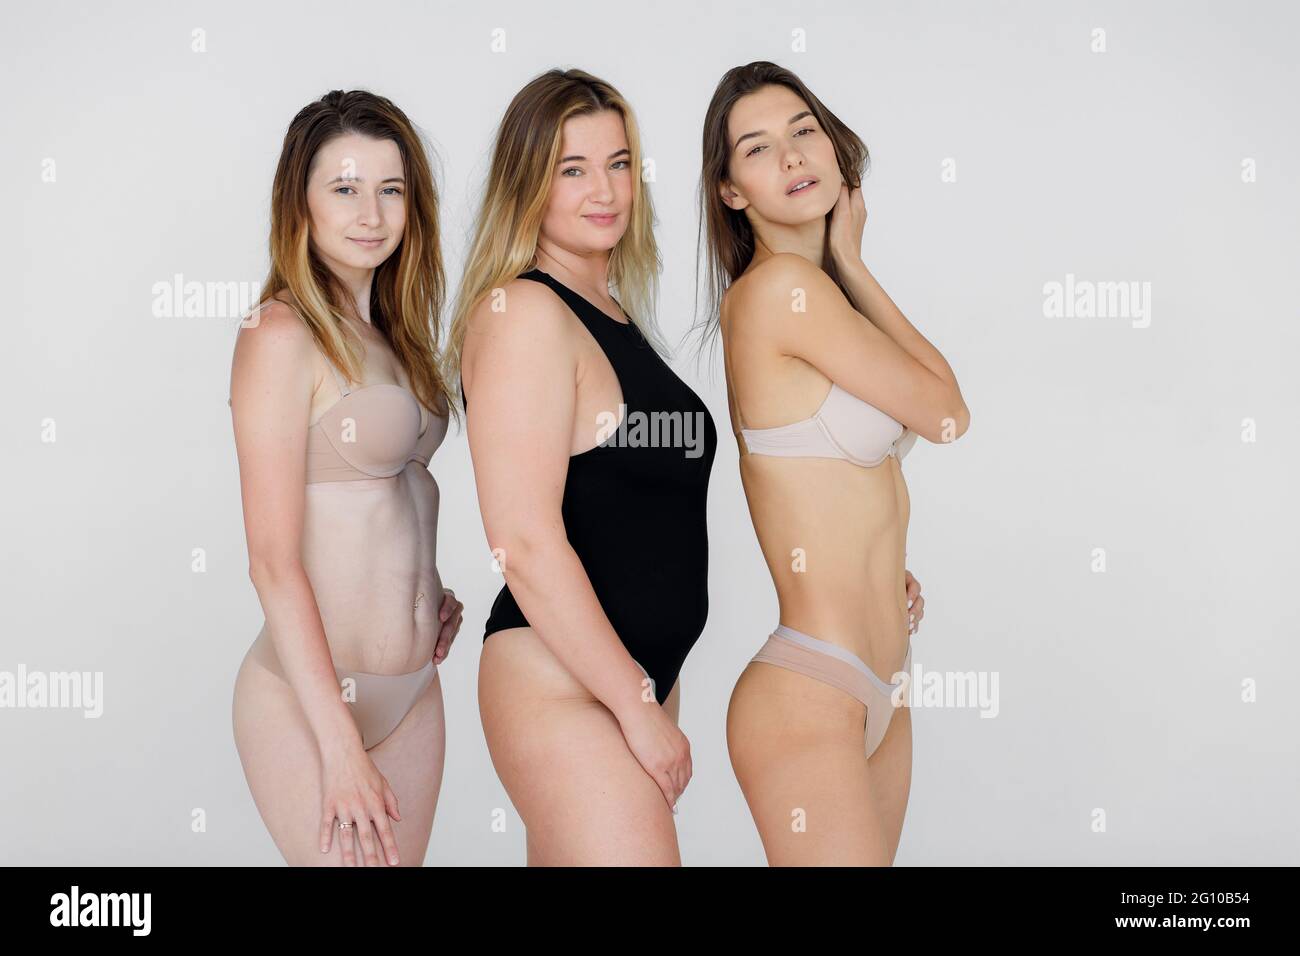 Group of women with different body and ethnicity posing together to show the woman power and strength. Curvy and skinny kind of female body concept Stock Photo